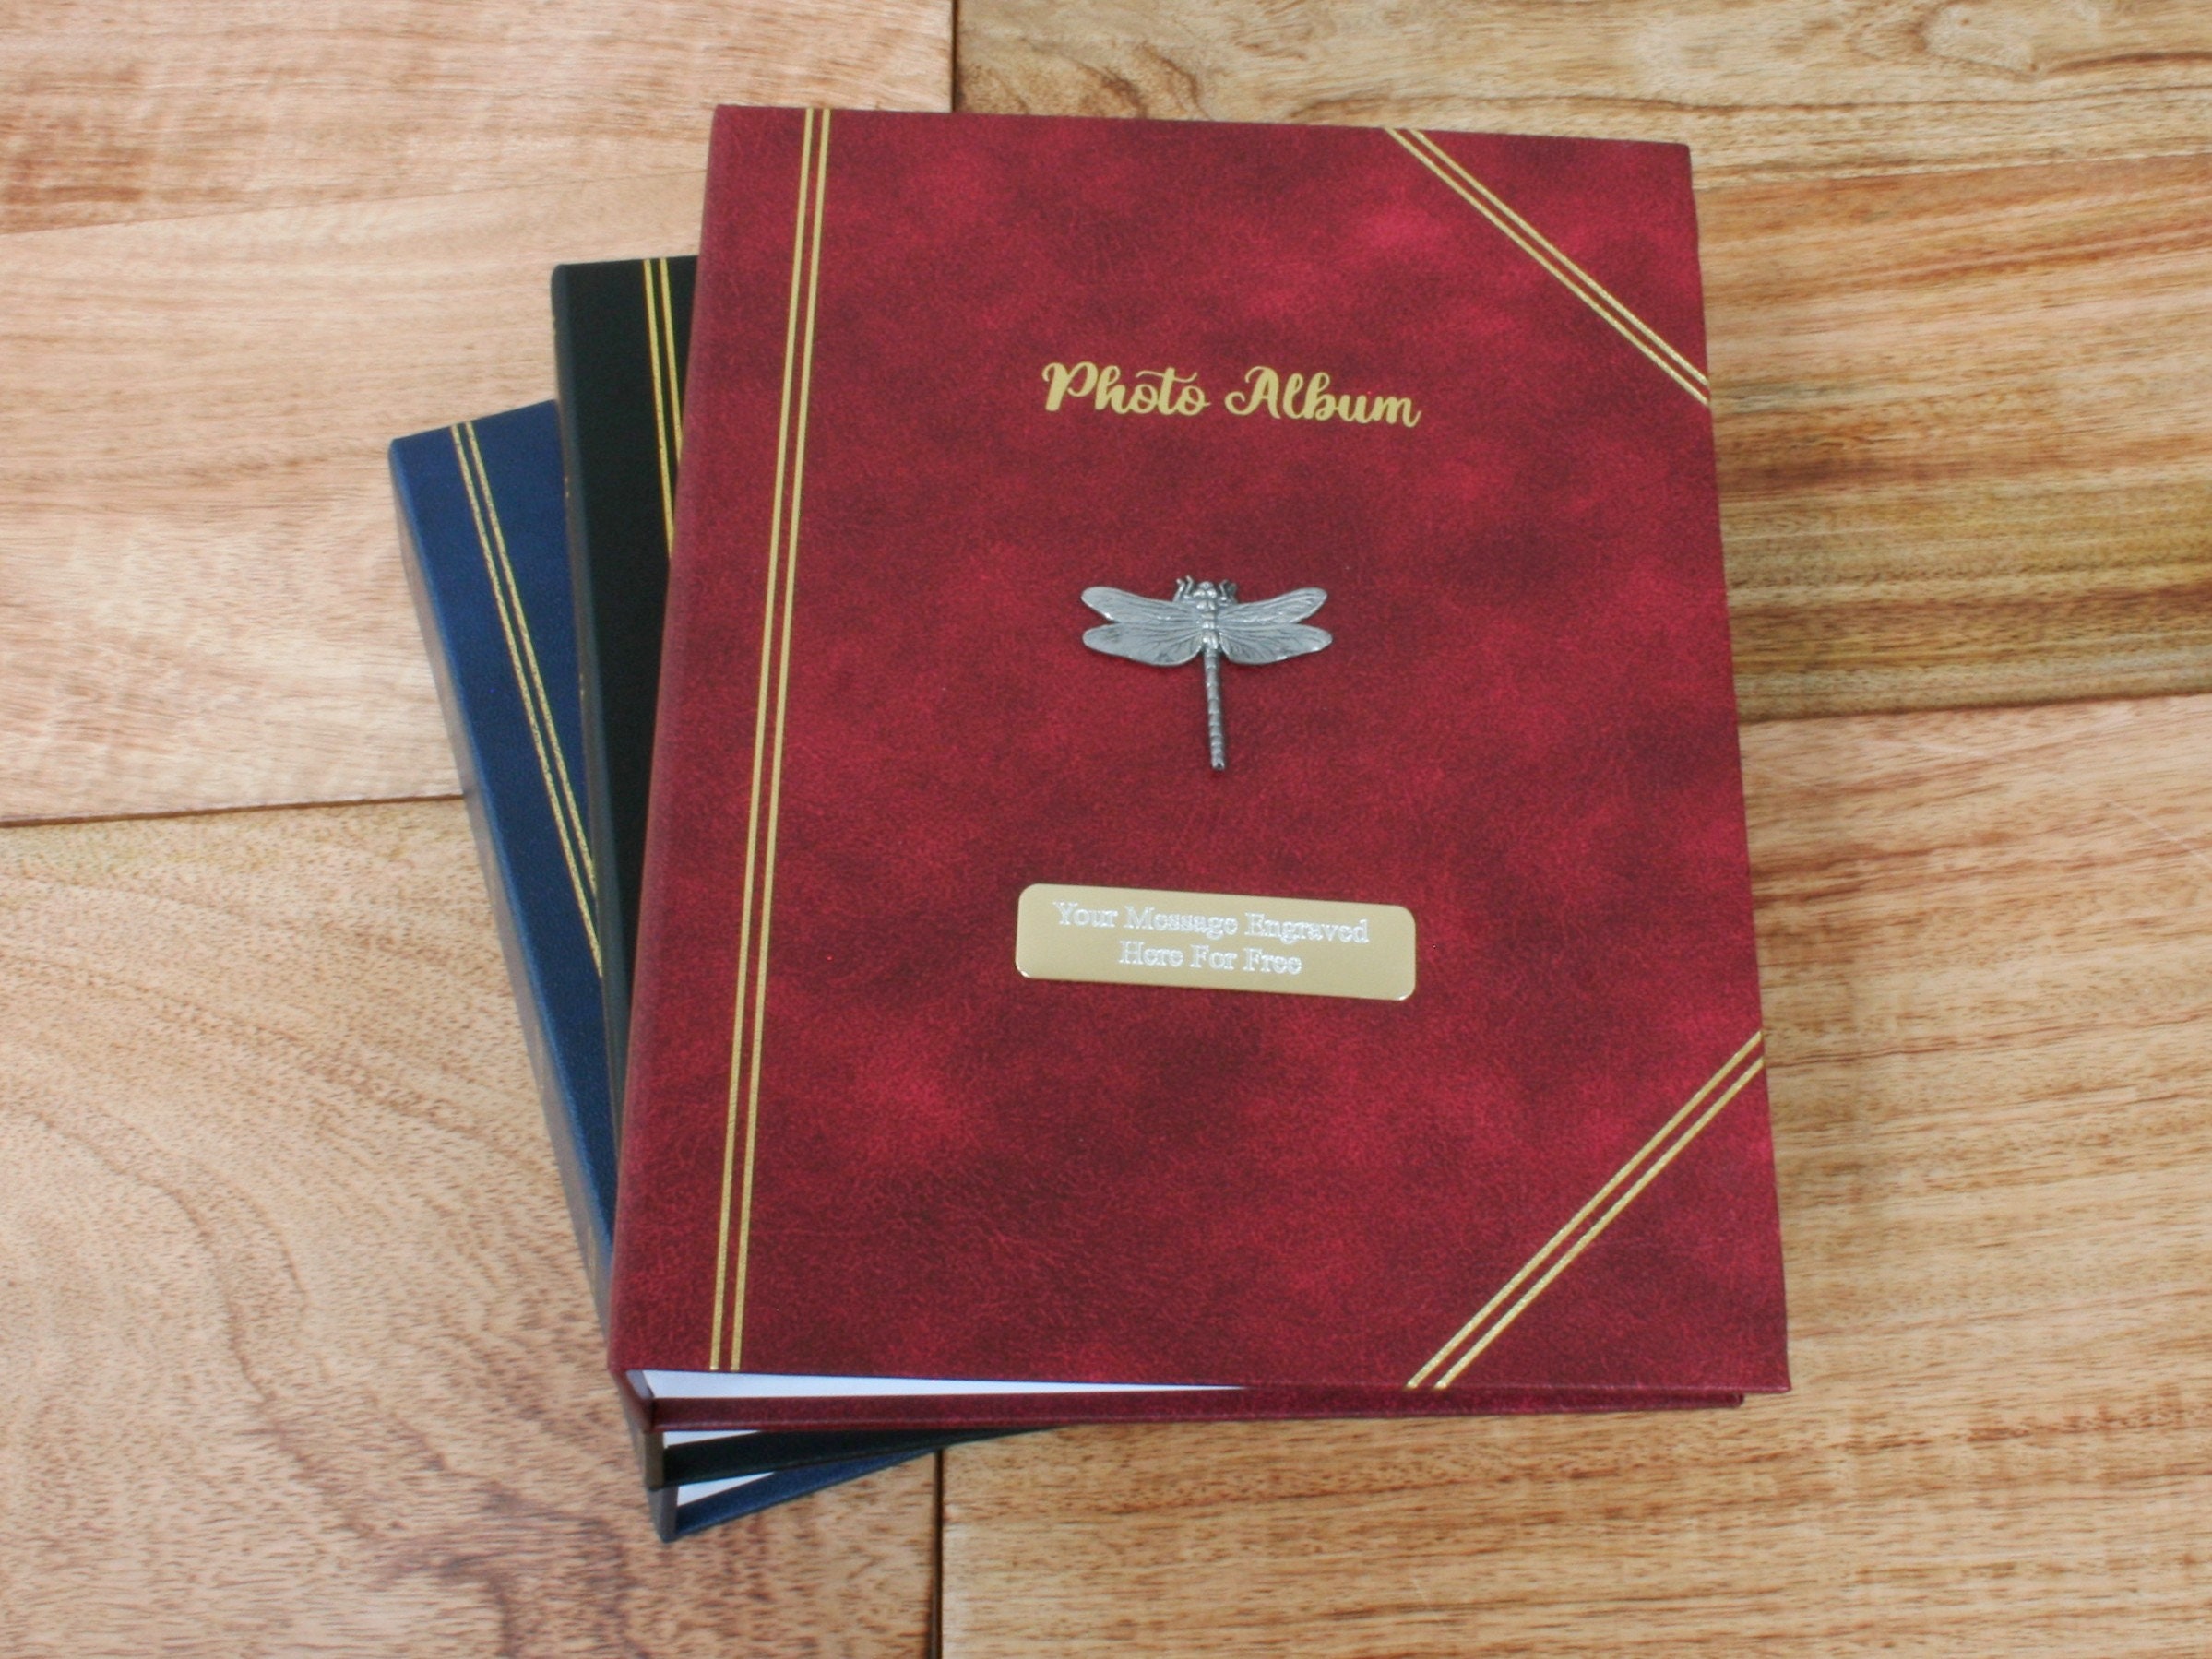 40th Birthday Brown Scrapbook, Guest Book Or Photo album With Gold